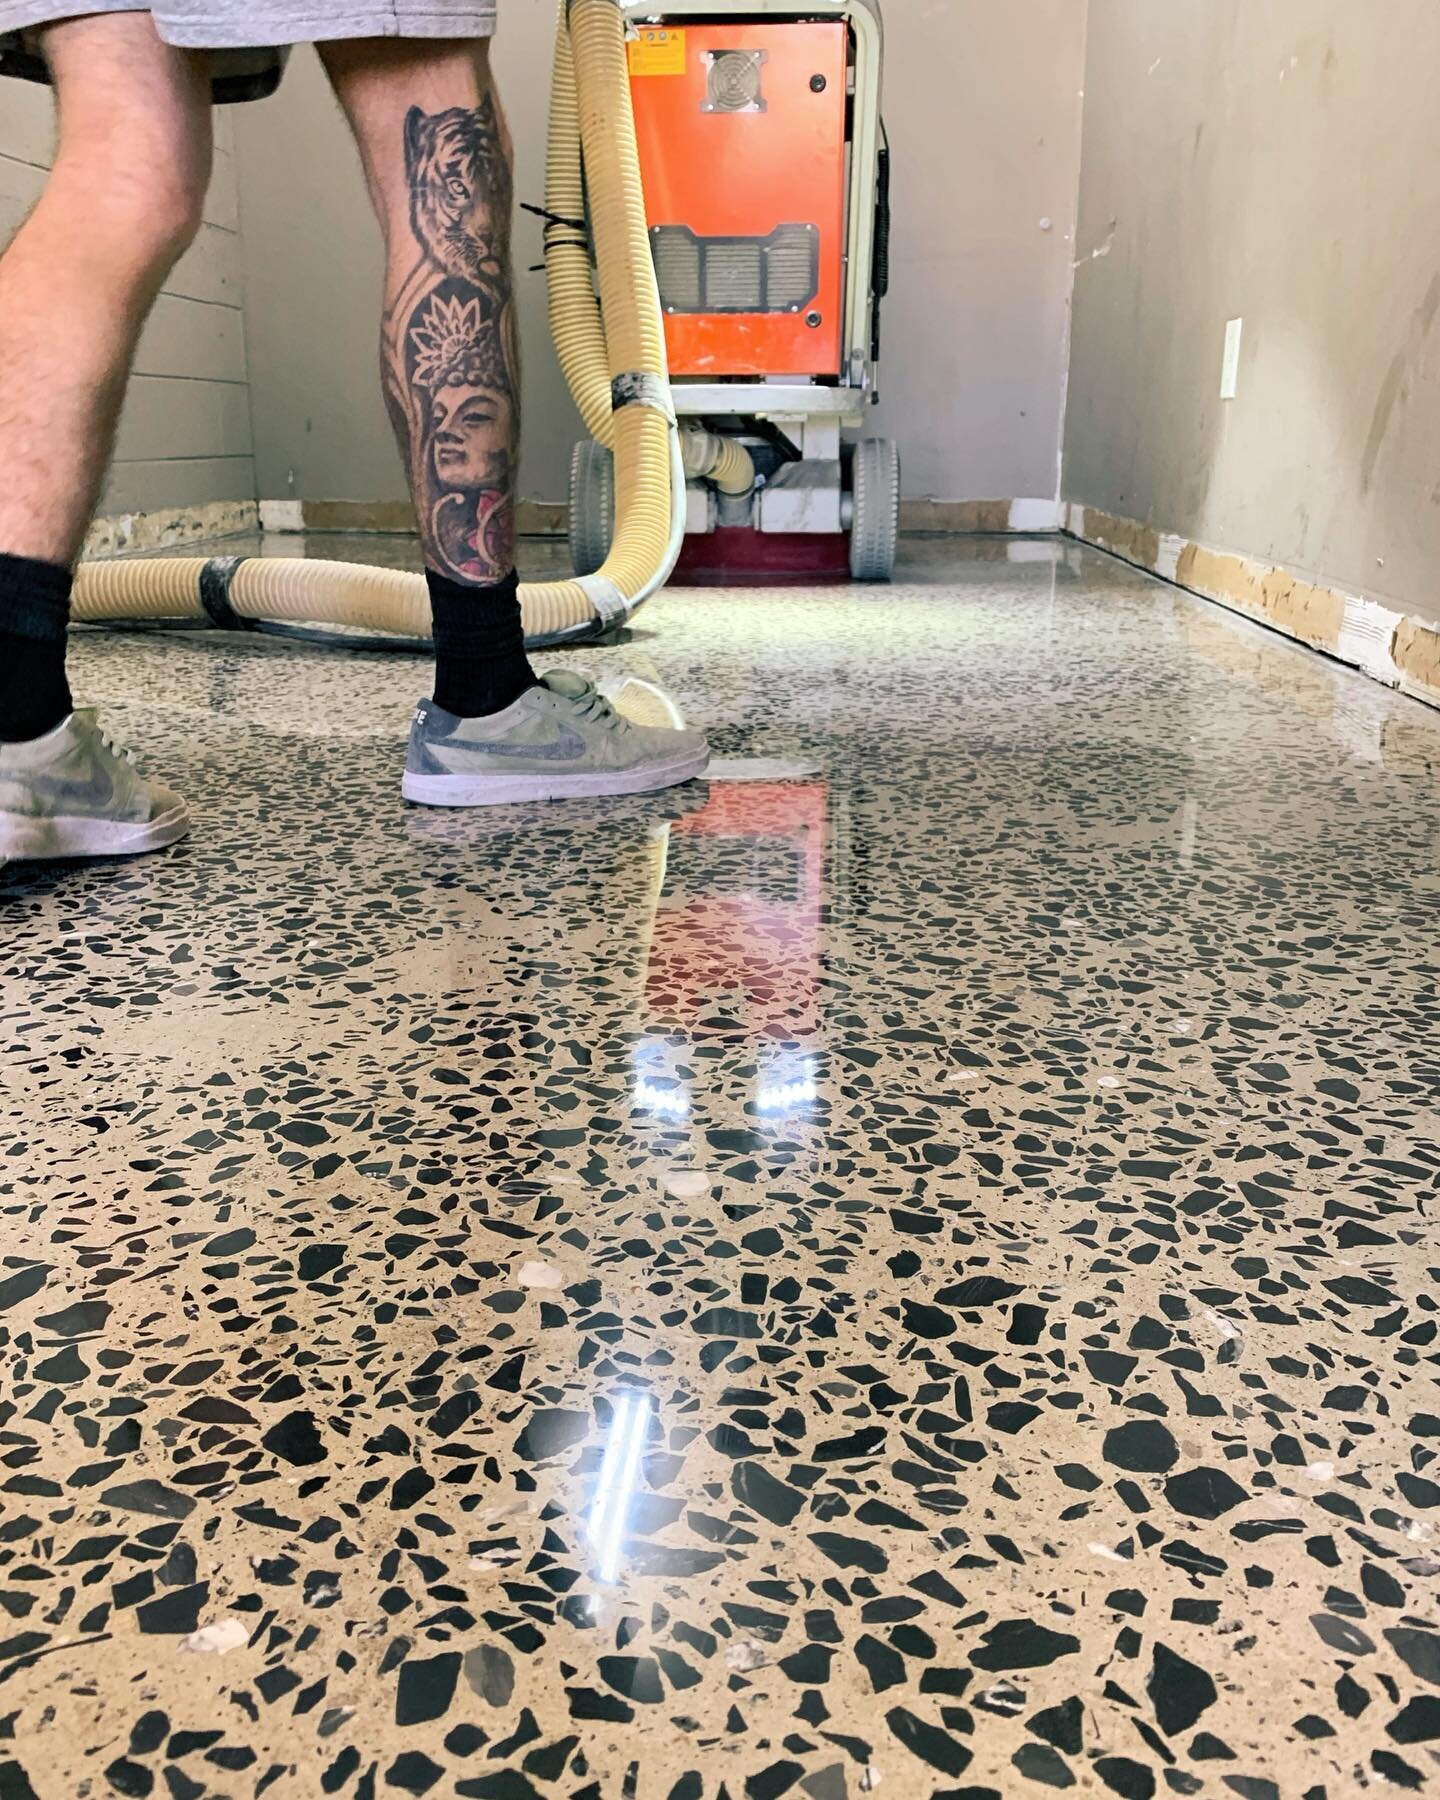 Mechanically polished concrete with full aggregate exposure effortlessly blends practicality and design for this commercial space.

.
.
.
.

#PolishedConcrete
#ConcretePolishing
#PolishedFloors #ConcreteFloors
#StainedConcrete #ConcreteFlooring
#Poli